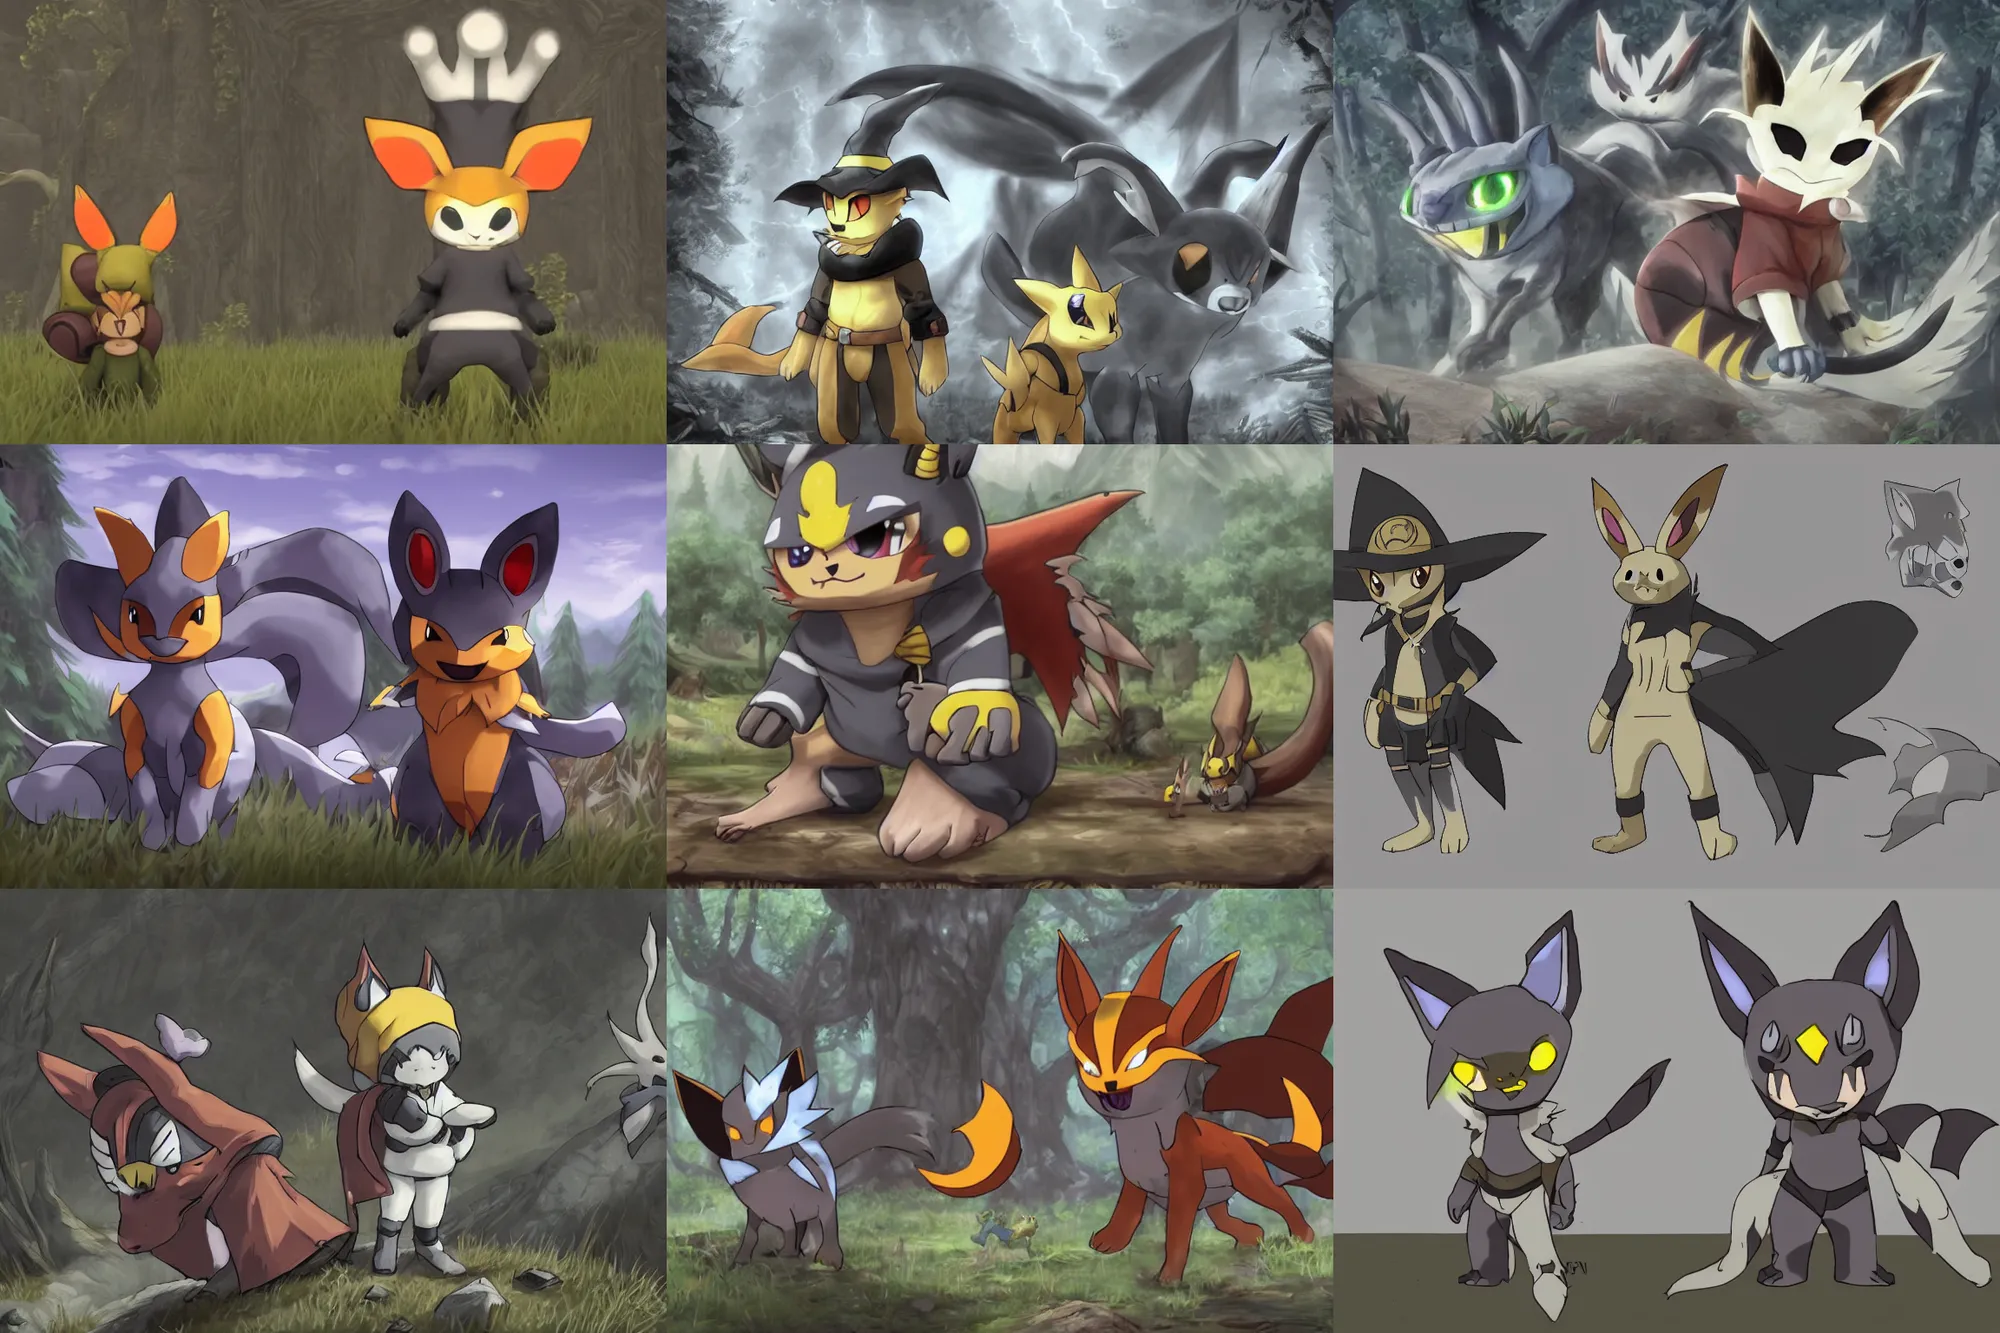 Prompt: trailcam footage grayscale low saturation video game elden clay growlithe : espeons reprisal star valley resident evil unreal engine mismagius oblivion mystery dungeon ultrahd resident eevee wearing bandanna fighting giratina in a stadium, the old god wearing a witch hat pokemon final cgsociety